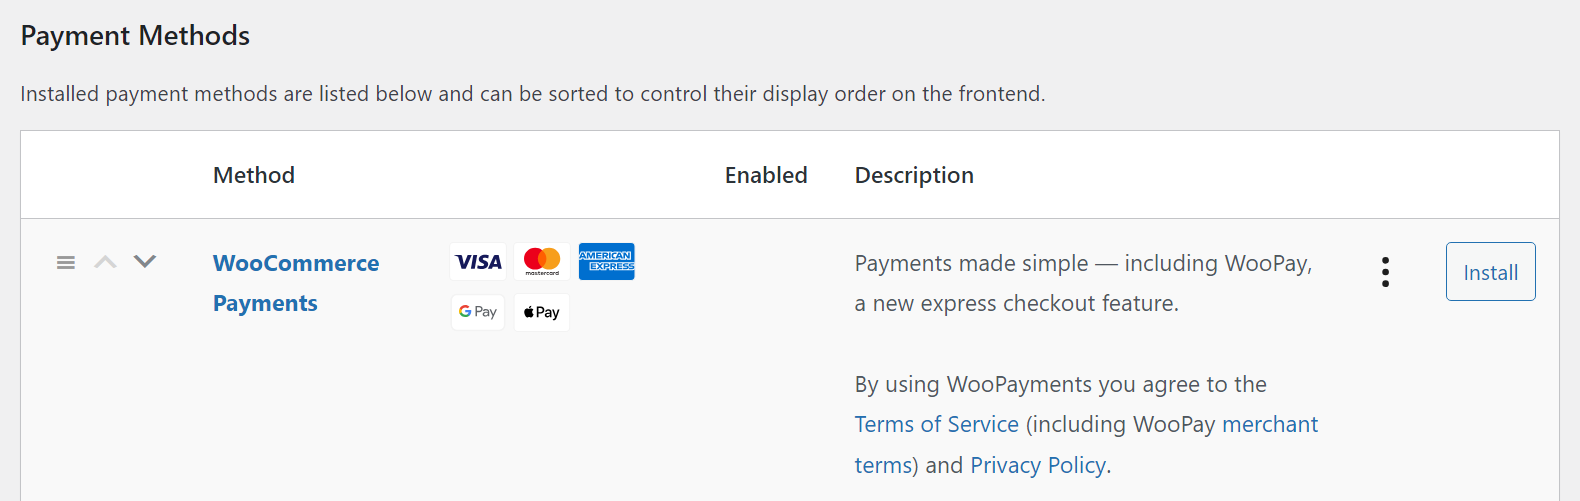 WooCommerce Payments.